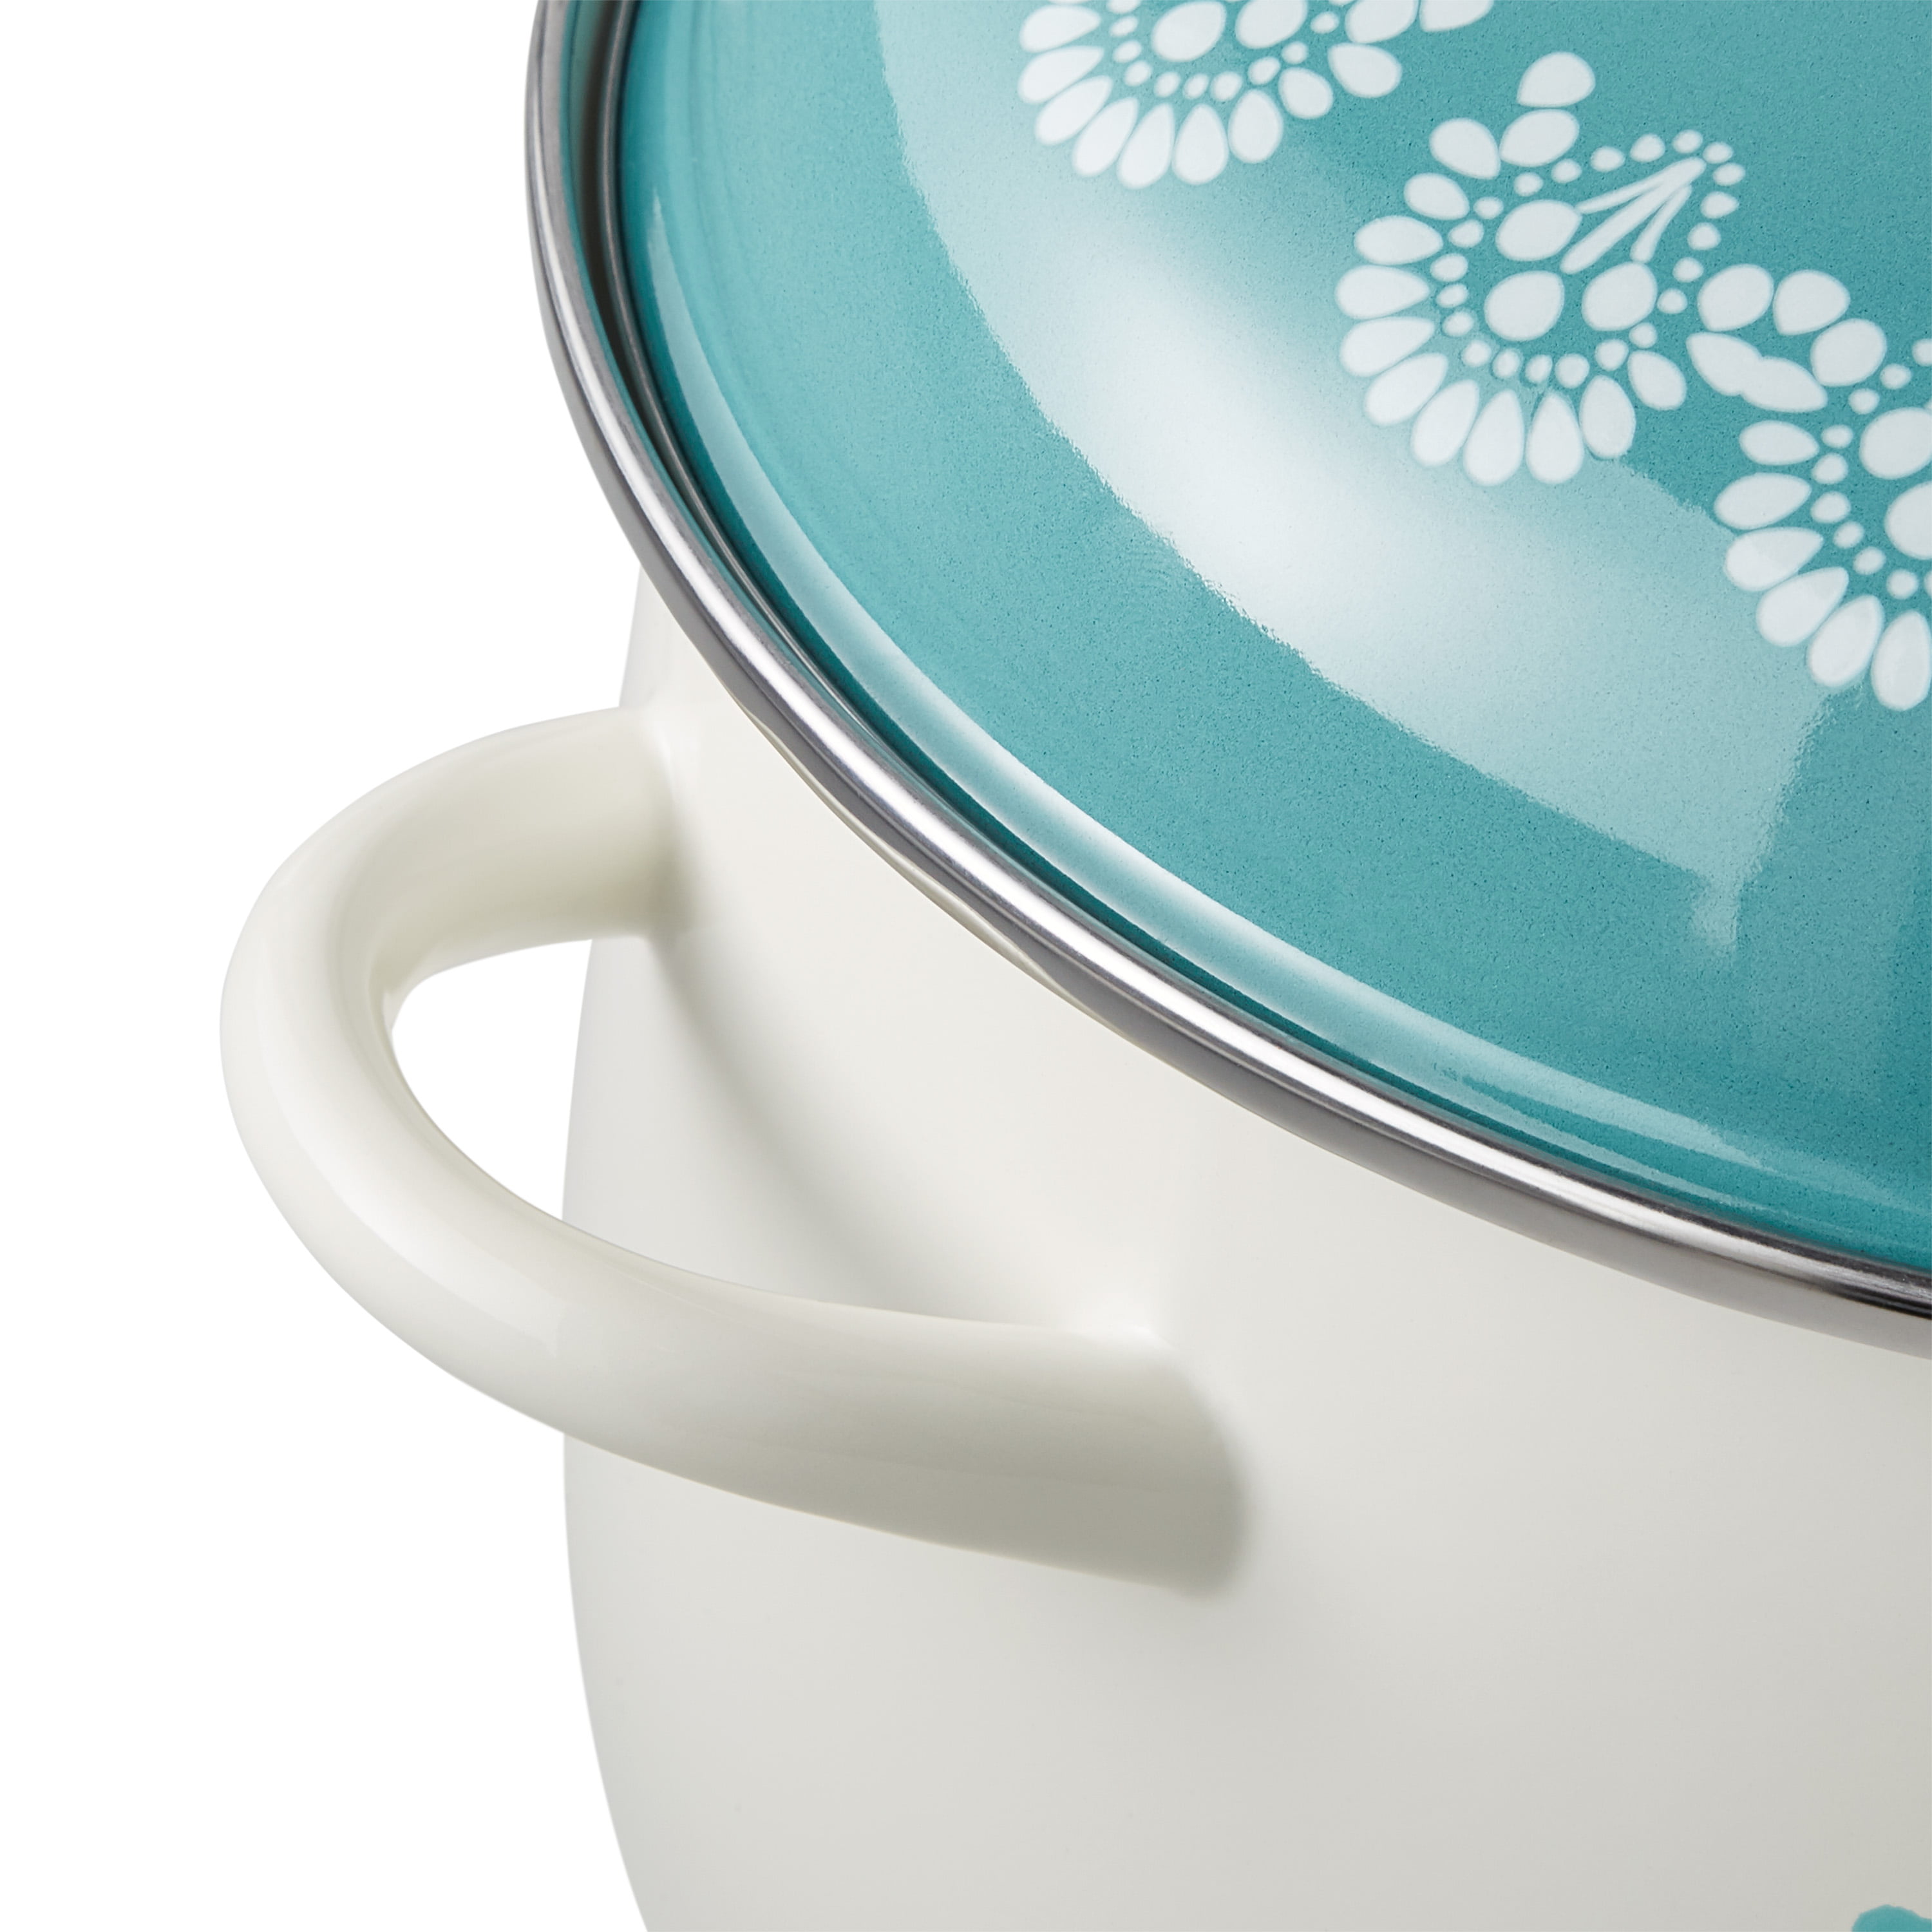 The Pioneer Woman Vintage Speckle 12-quart Stock Pot with Hollow Side  Handles- Turquoise,  price tracker / tracking,  price history  charts,  price watches,  price drop alerts